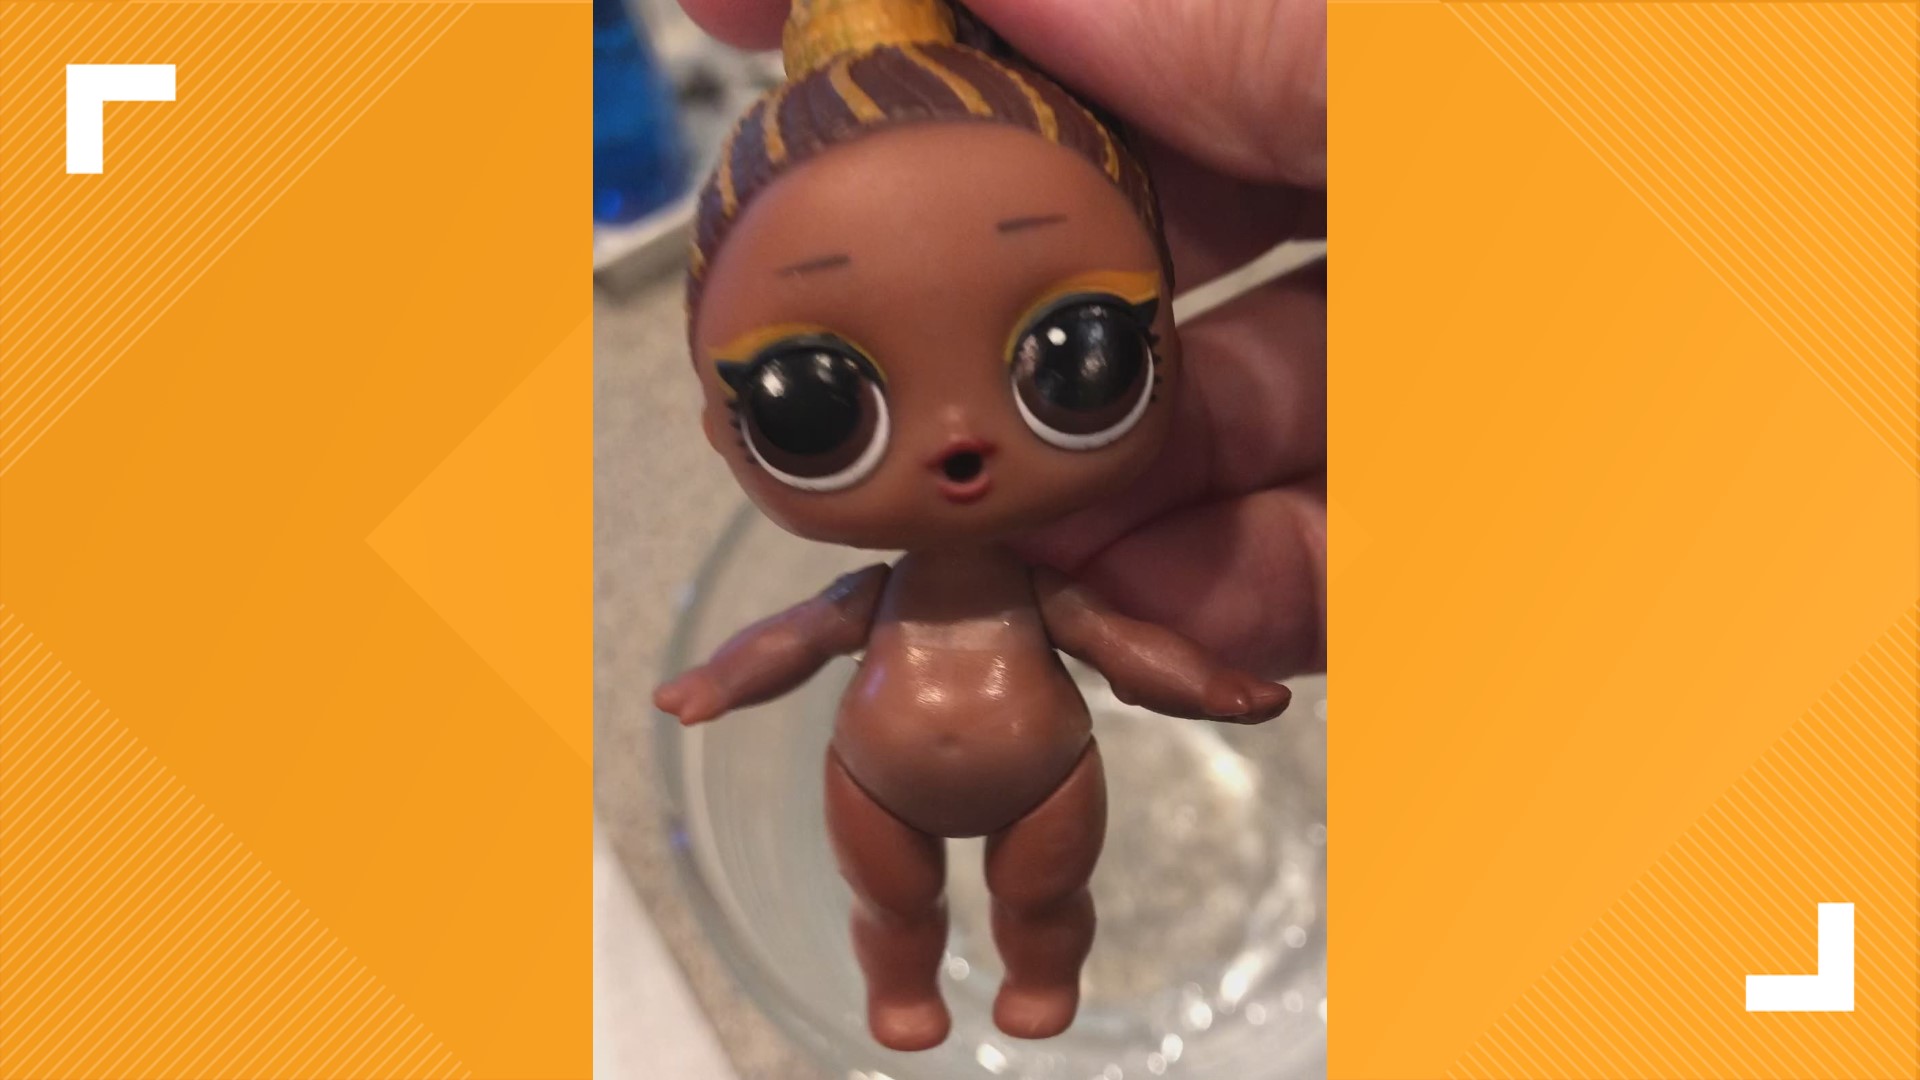 KTVB's Maggie O'Mara received reports that LOL Surprise! dolls reveal inappropriate clothing when dipped in cold water, so she put her daughter's dolls to the test.